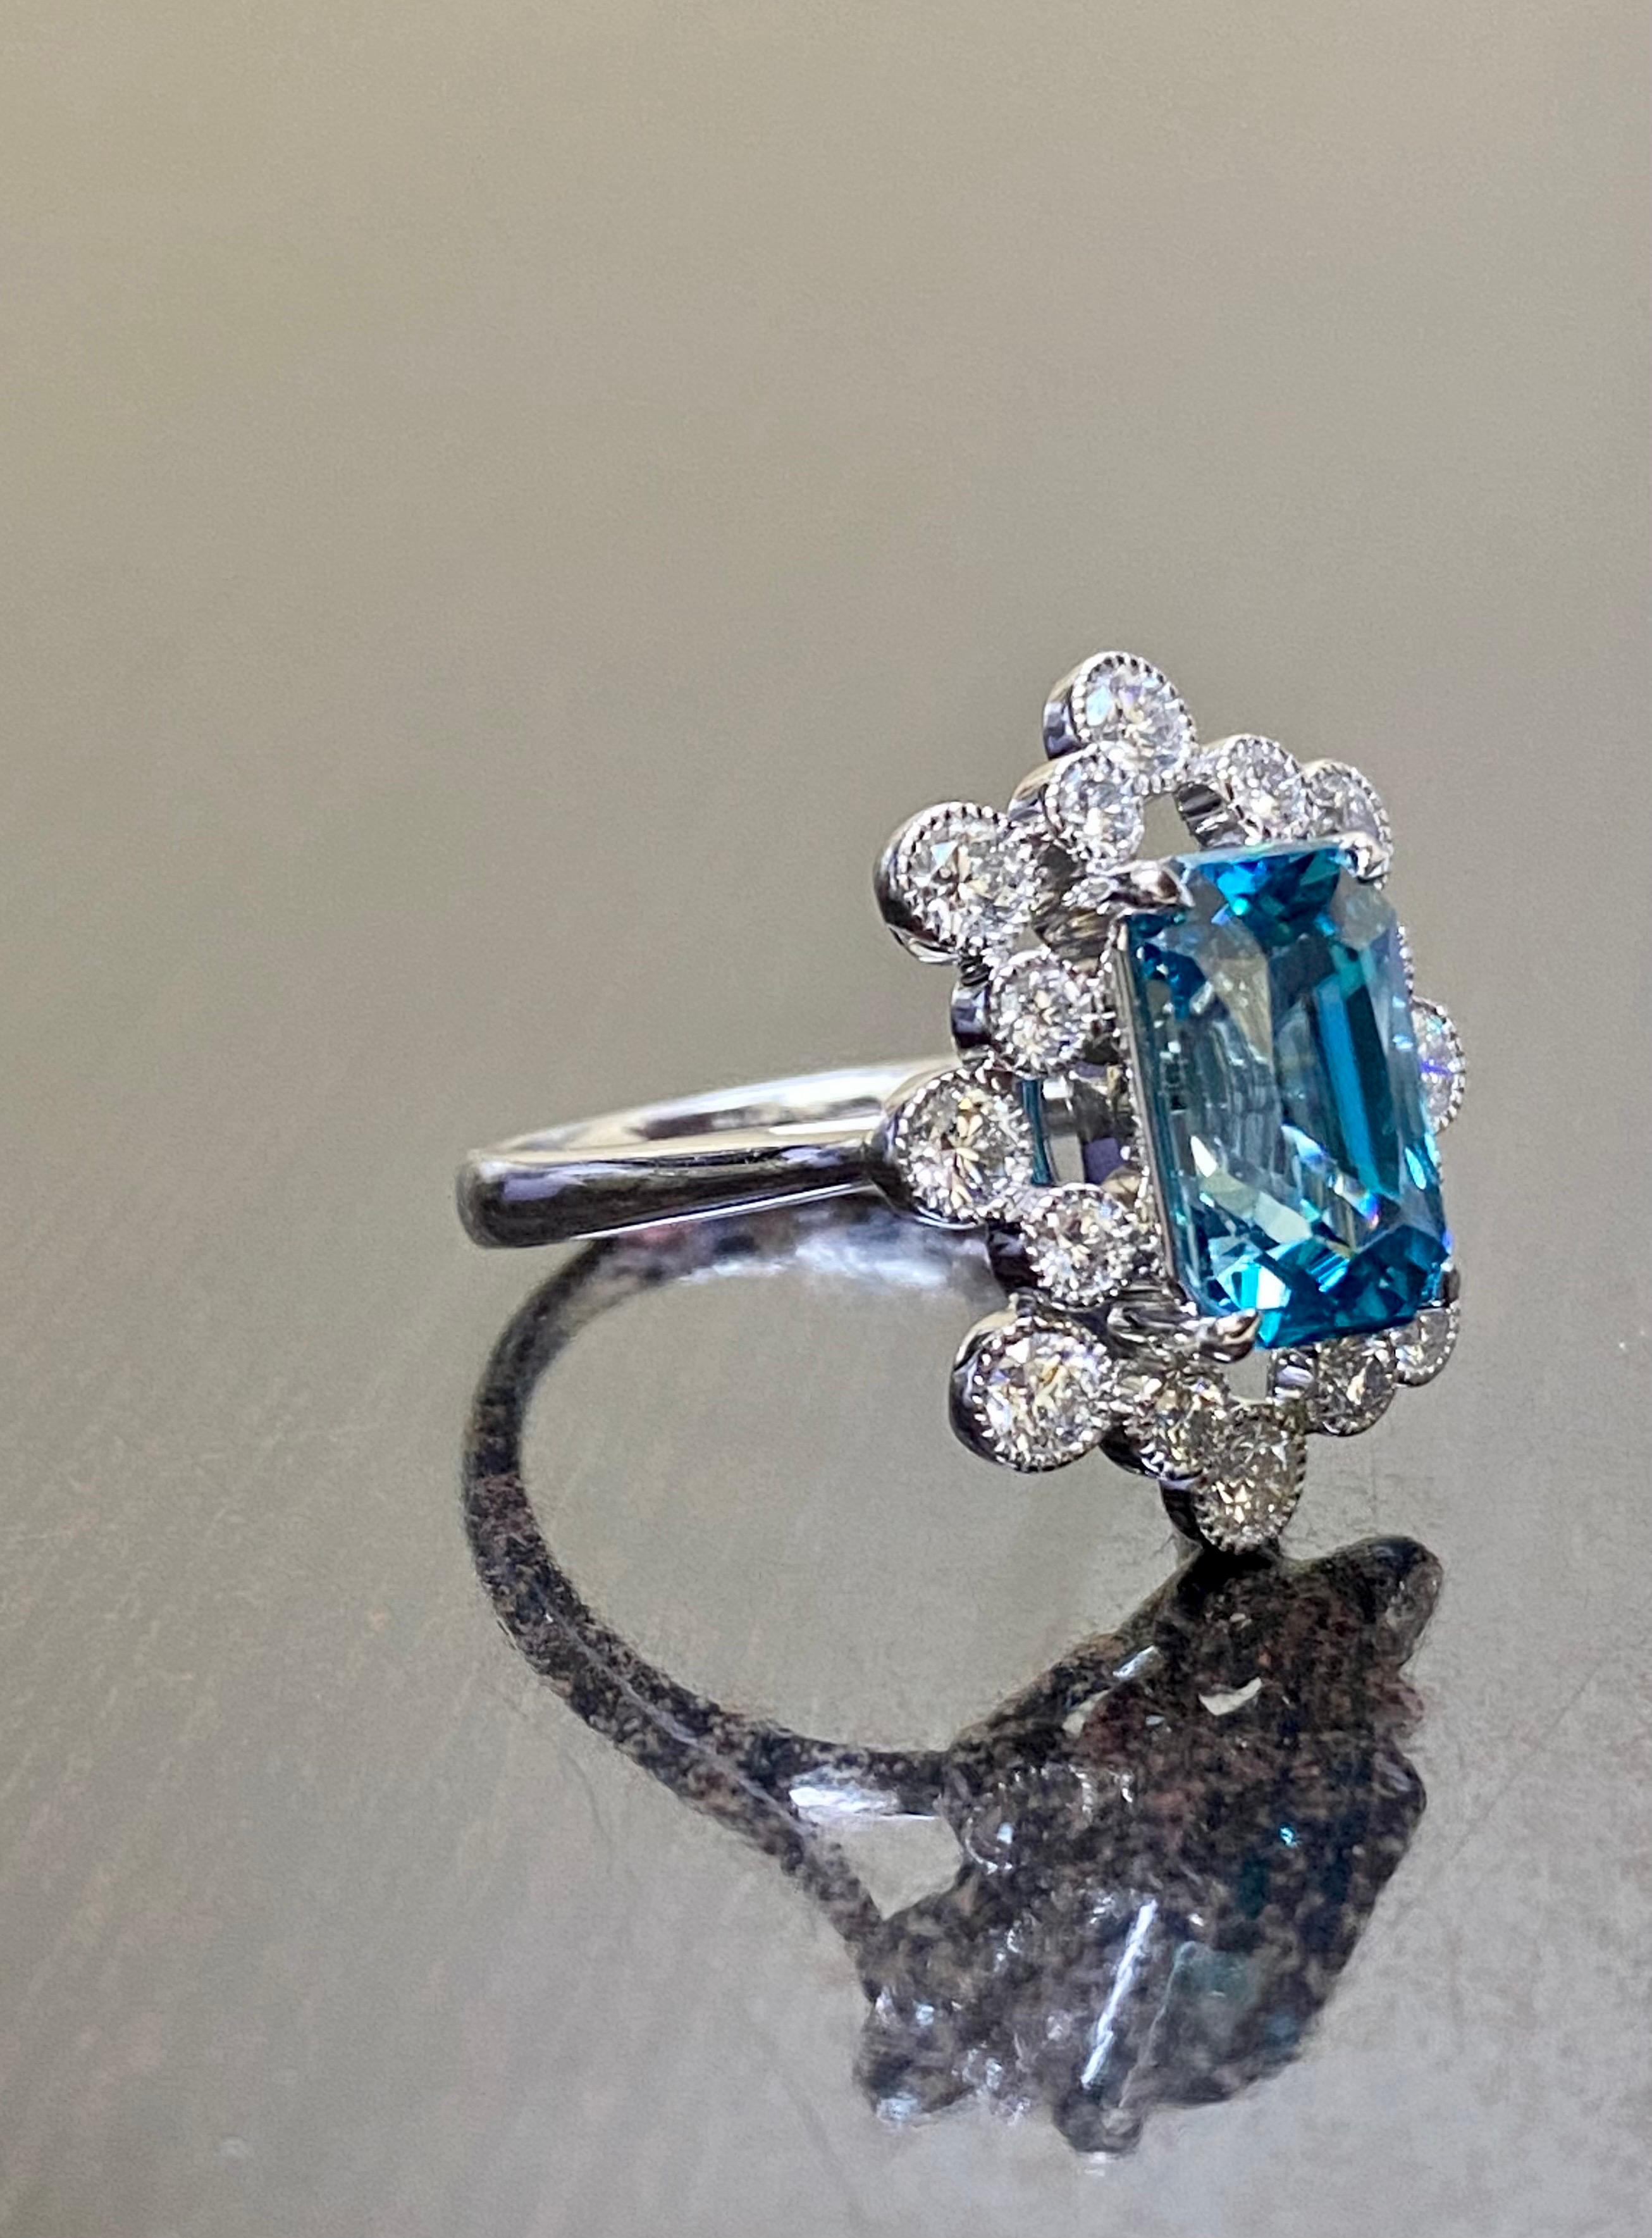 Modern Platinum Diamond Radiant Cut 6.53 Carat Blue Zircon Engagement Ring In New Condition For Sale In Los Angeles, CA